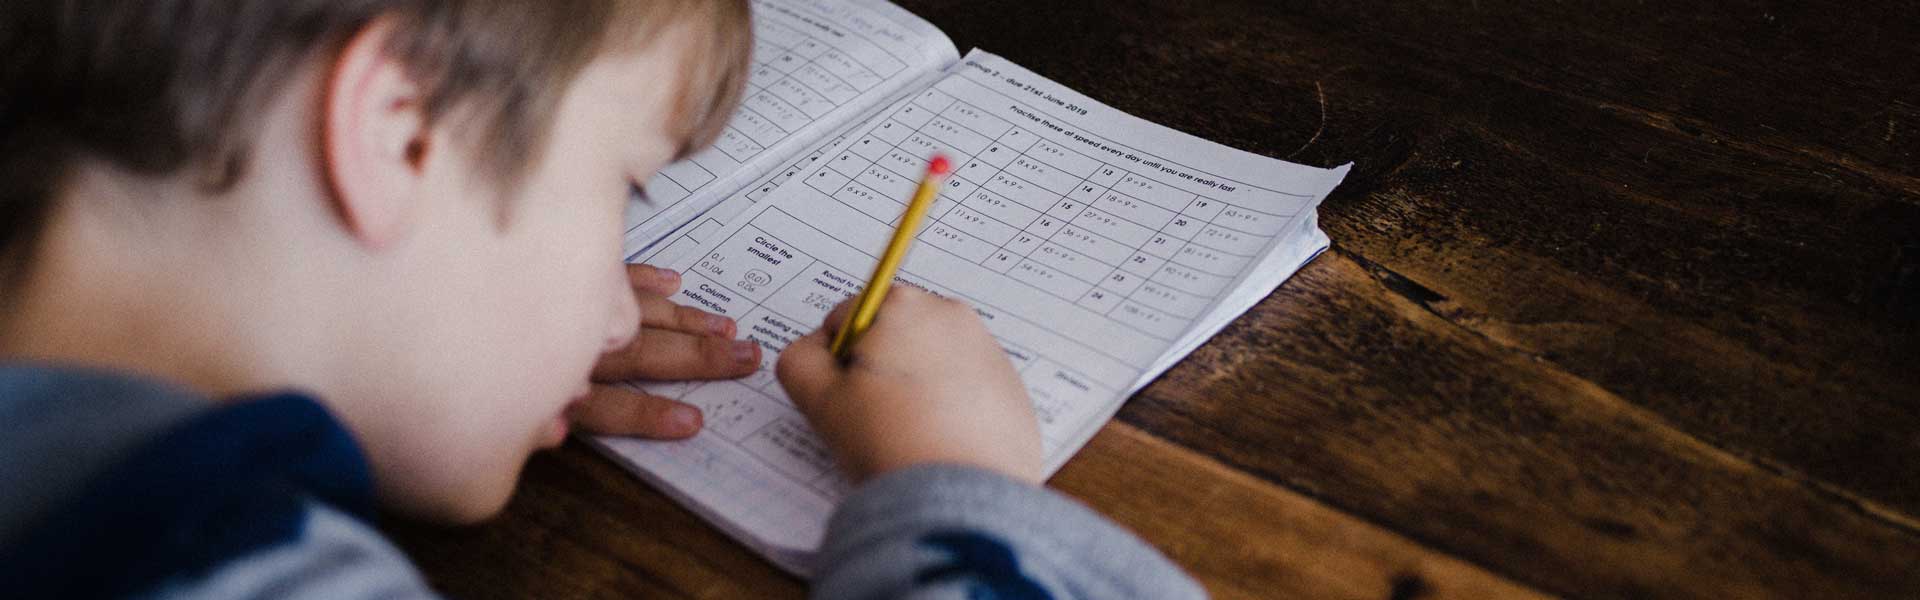 Effective Tips To Improve Kids Handwriting Within A Week